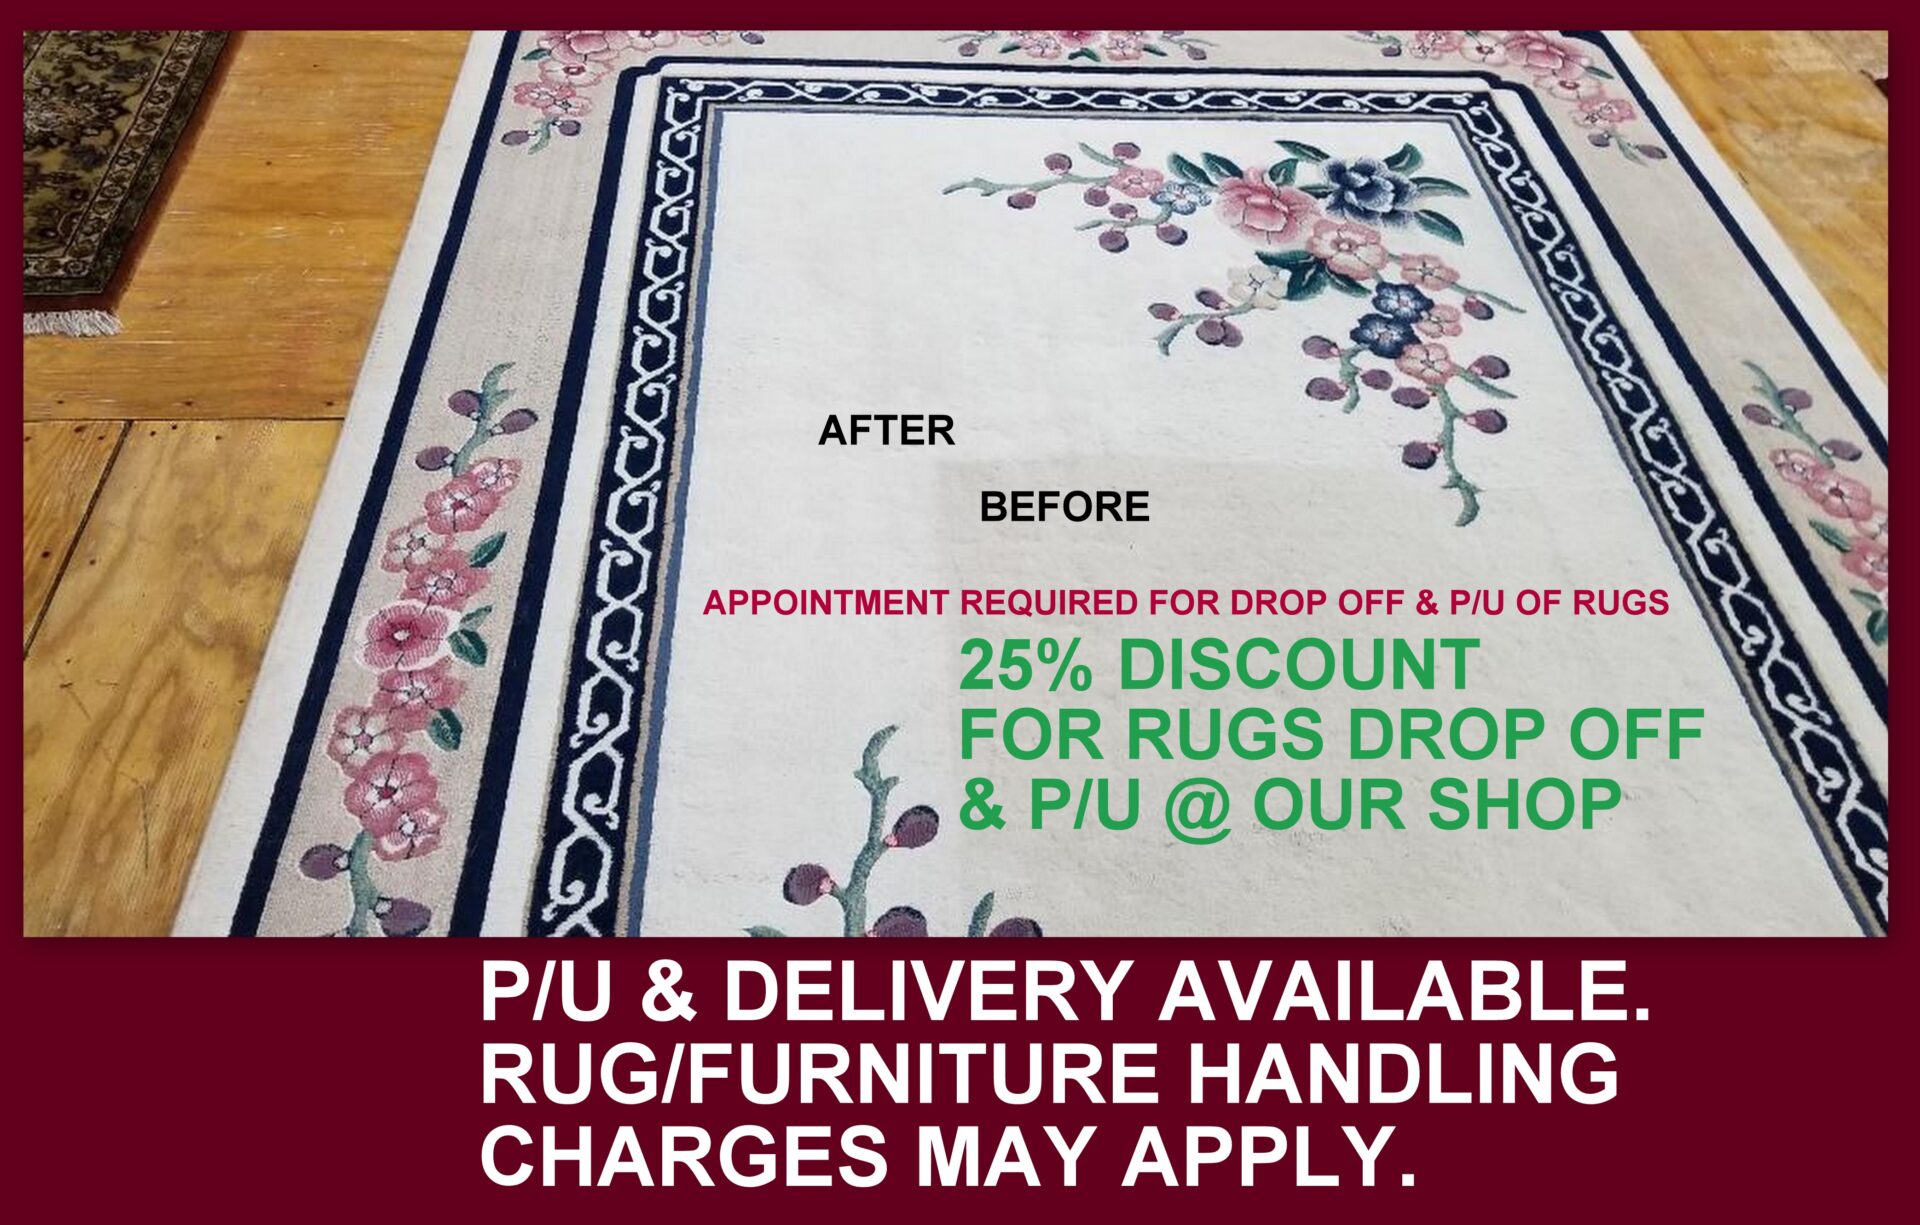 A rug is being advertised for sale by the rug store.